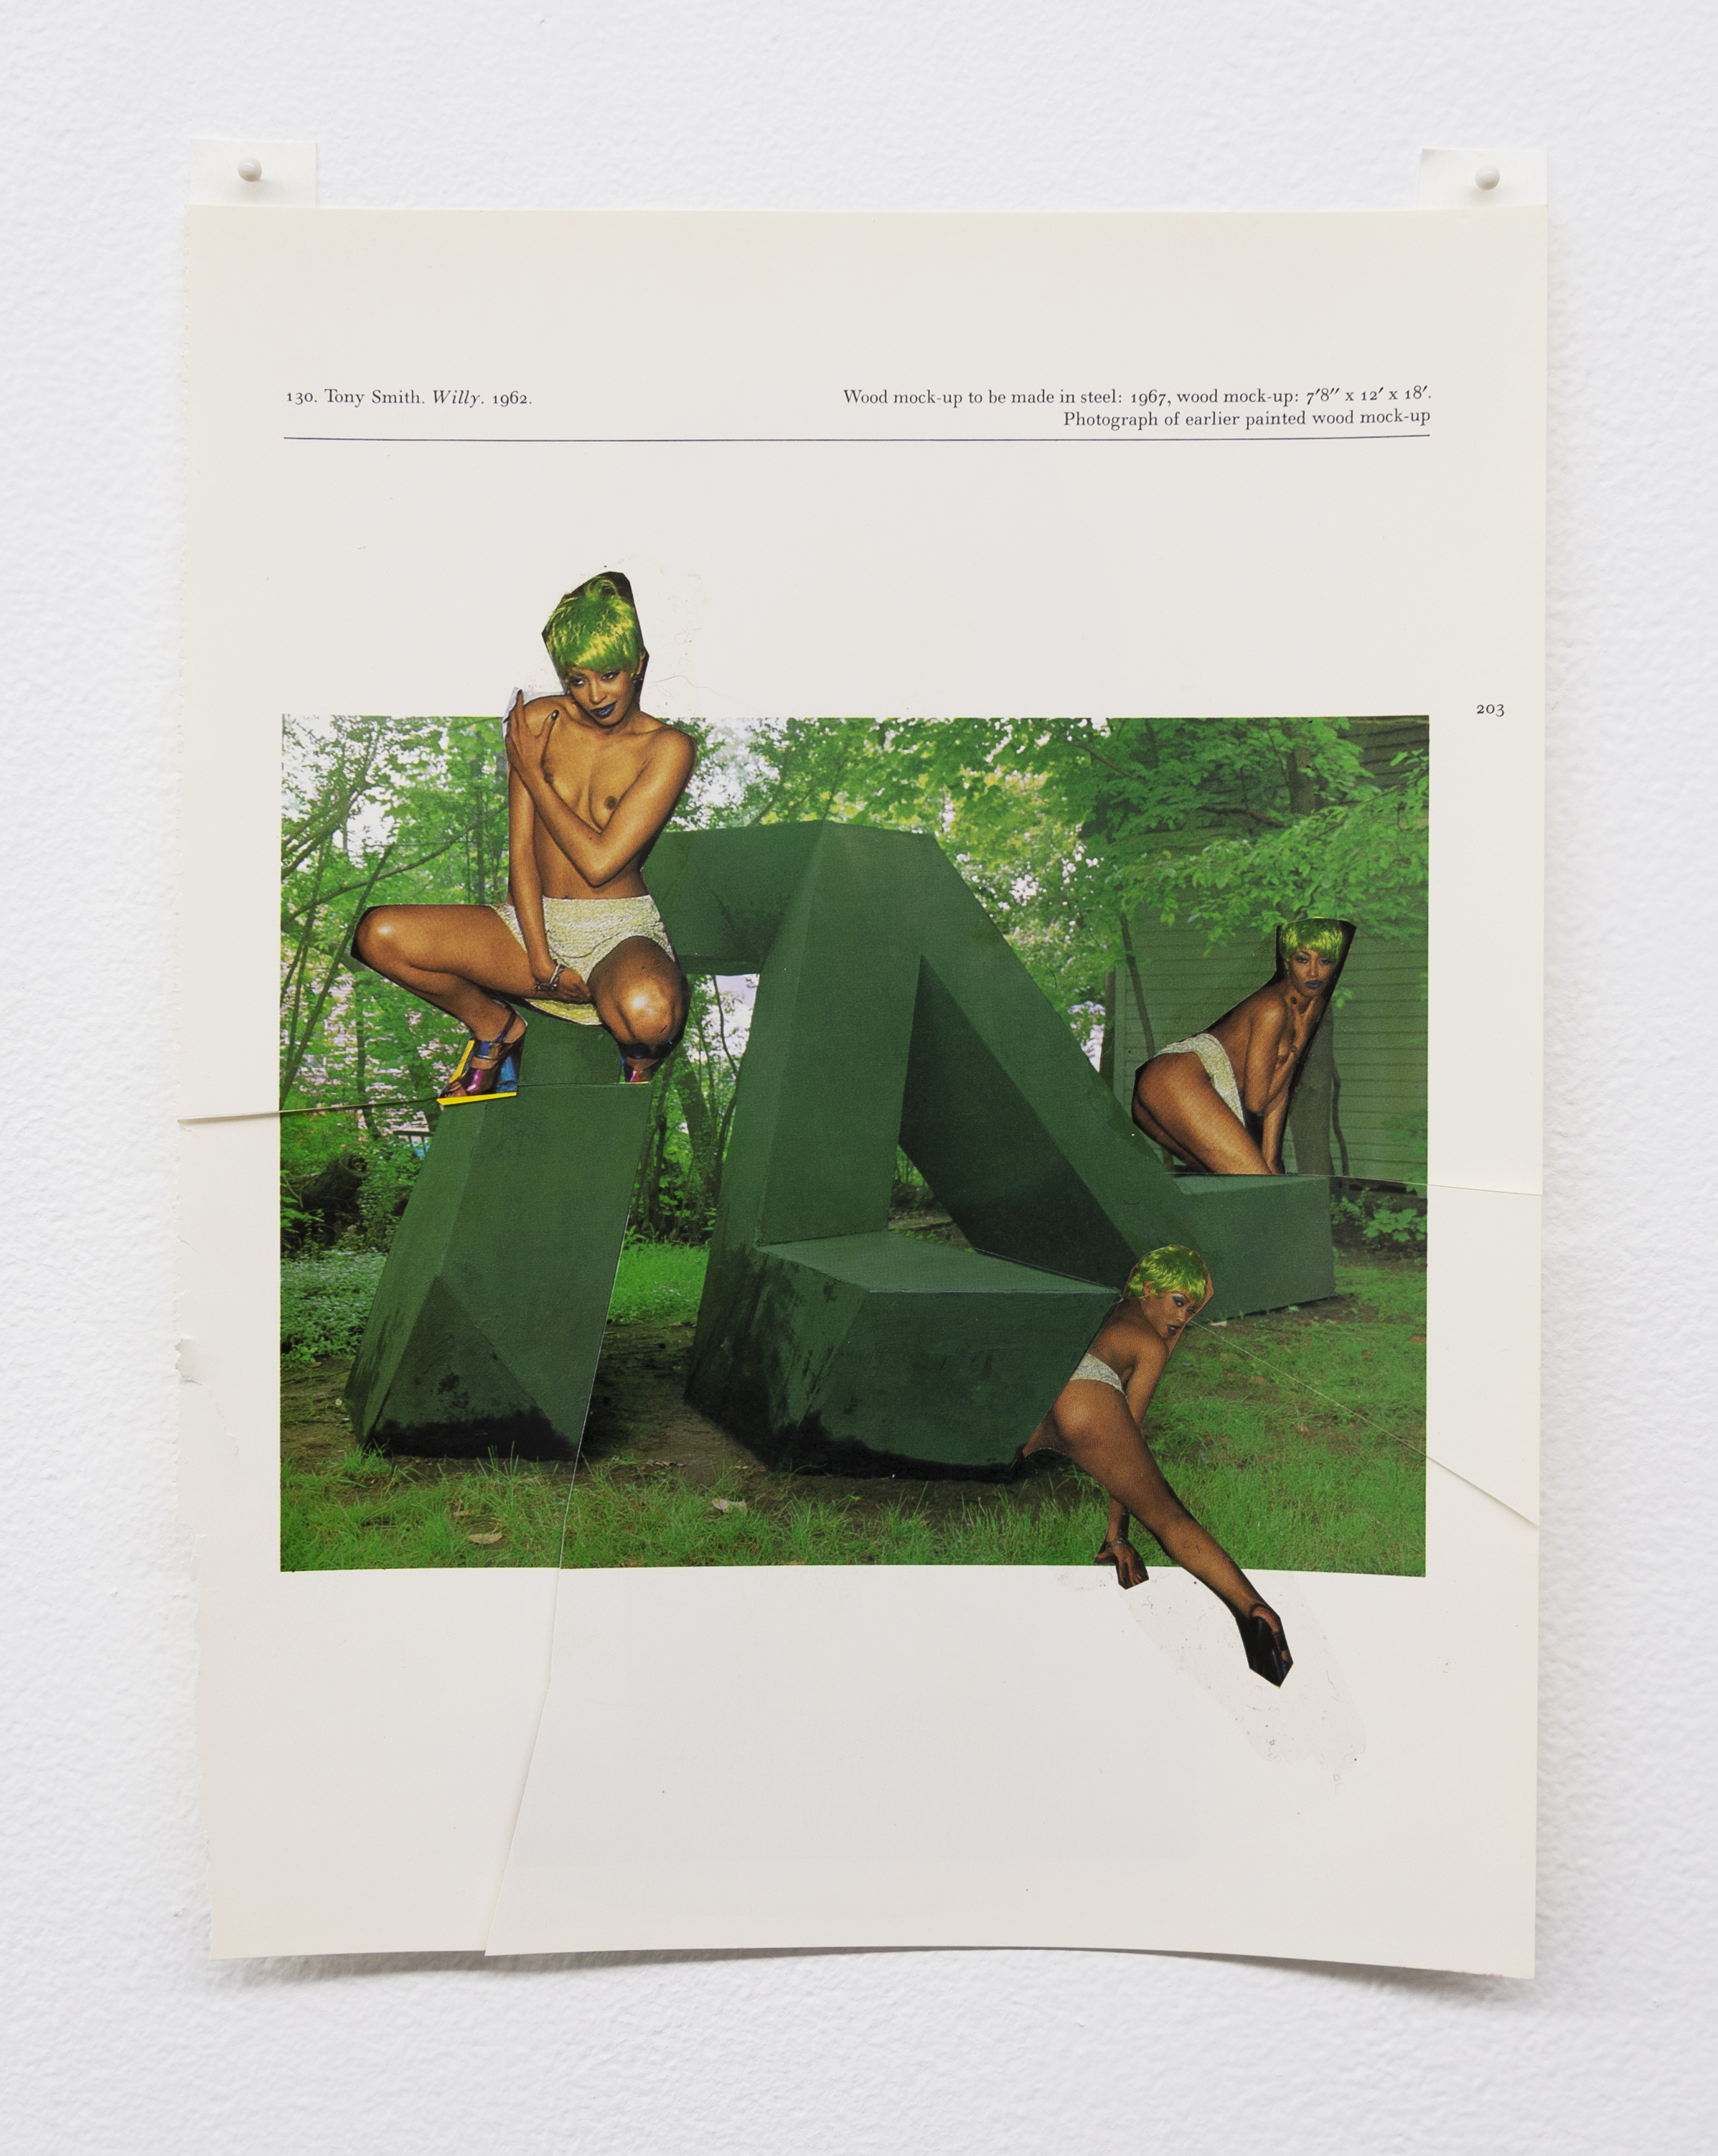  Narcissister,  Studies for Participatory Sculptures, Untitled (Posing in green wigs, after Tony Smith) , 2018, Paper, rubber cement, 10.75 x 8.5 in  